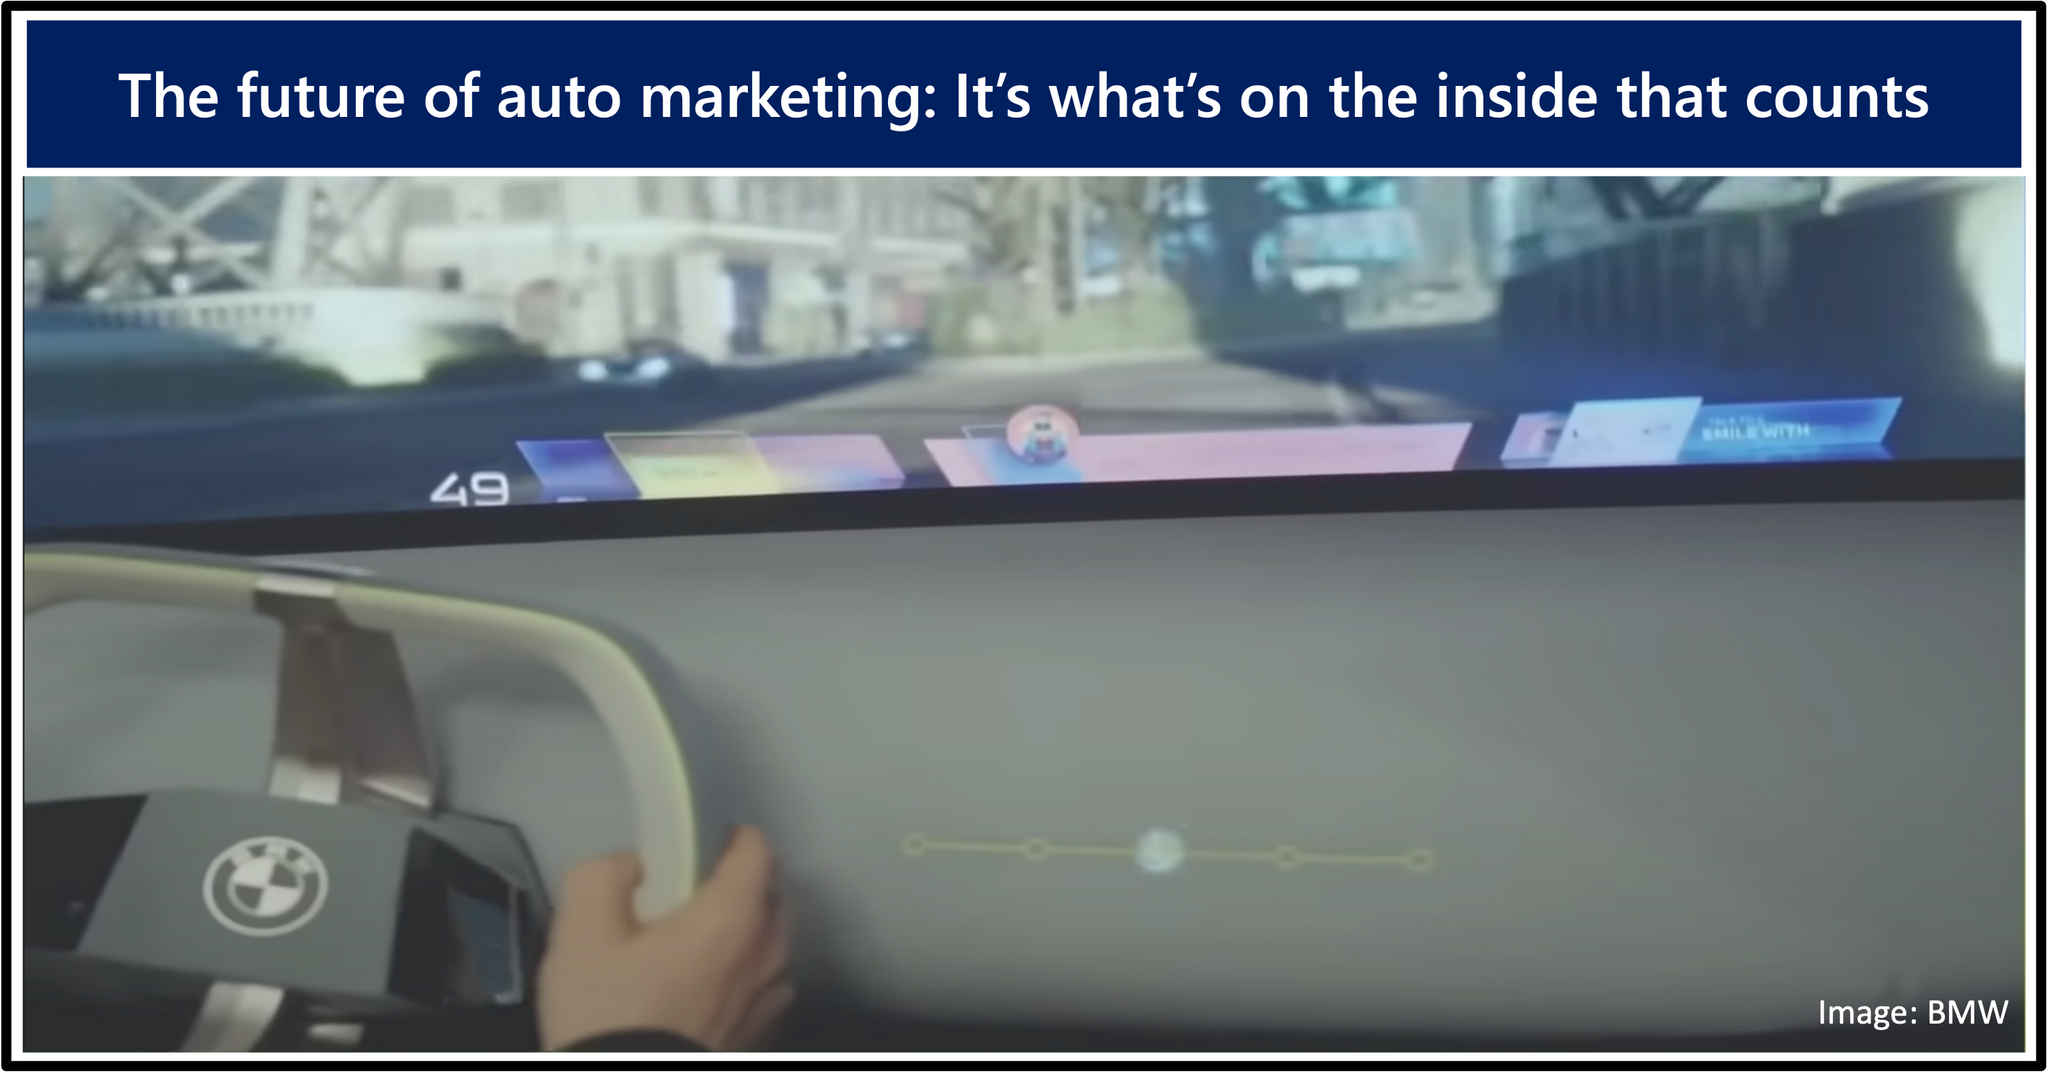 The future of automotive marketing: It's what's on the inside that counts